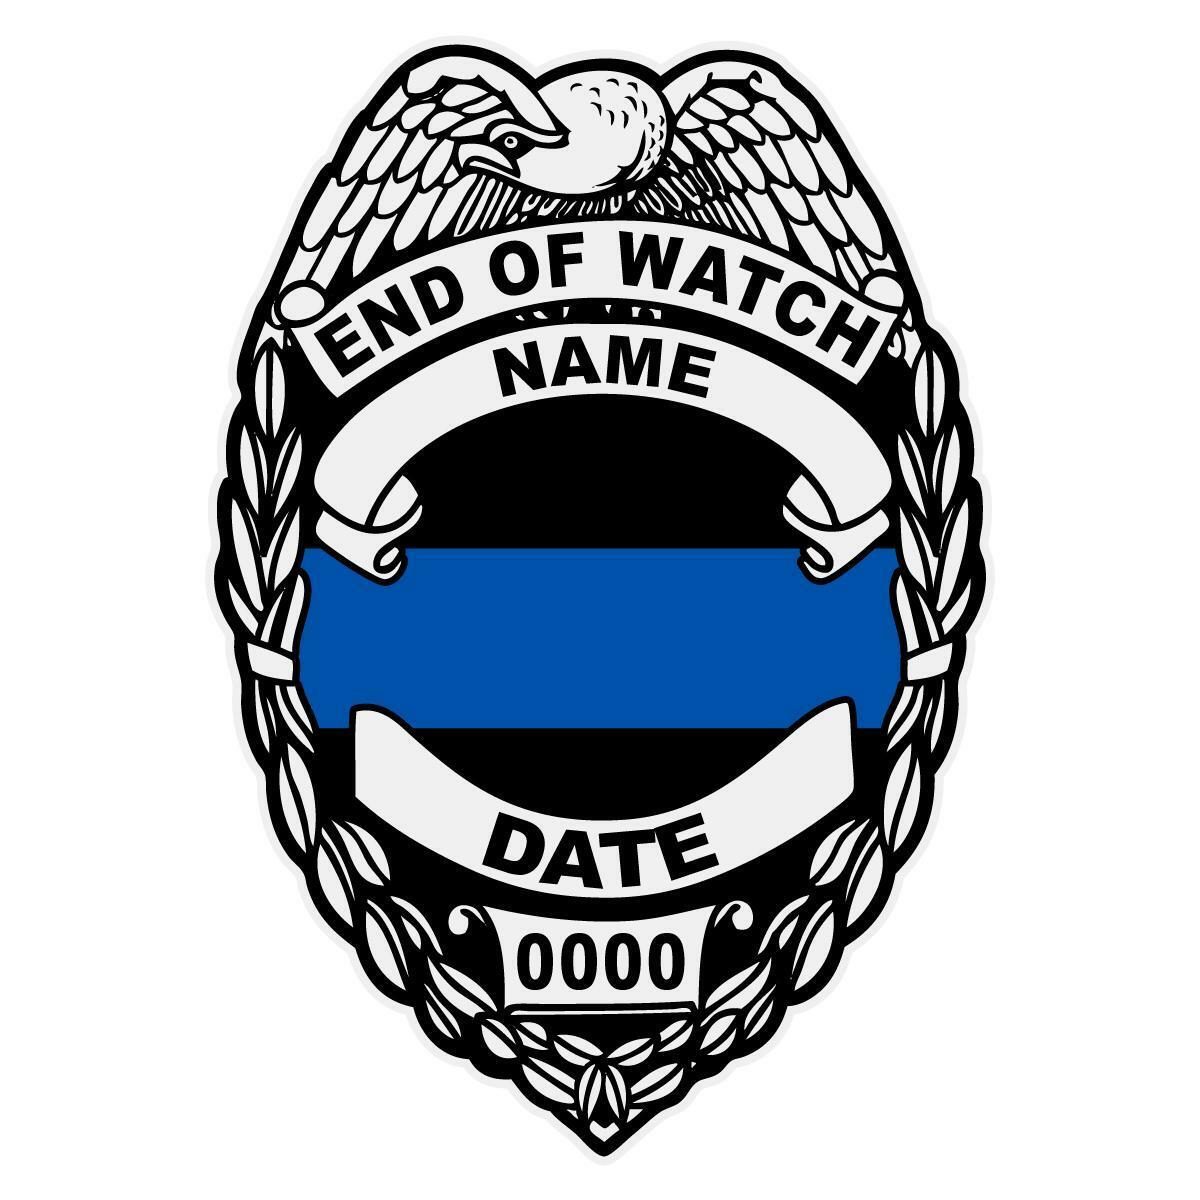 Police Custom Or Memorial Reflective Badge Police Law Enforcement Decal Sticker